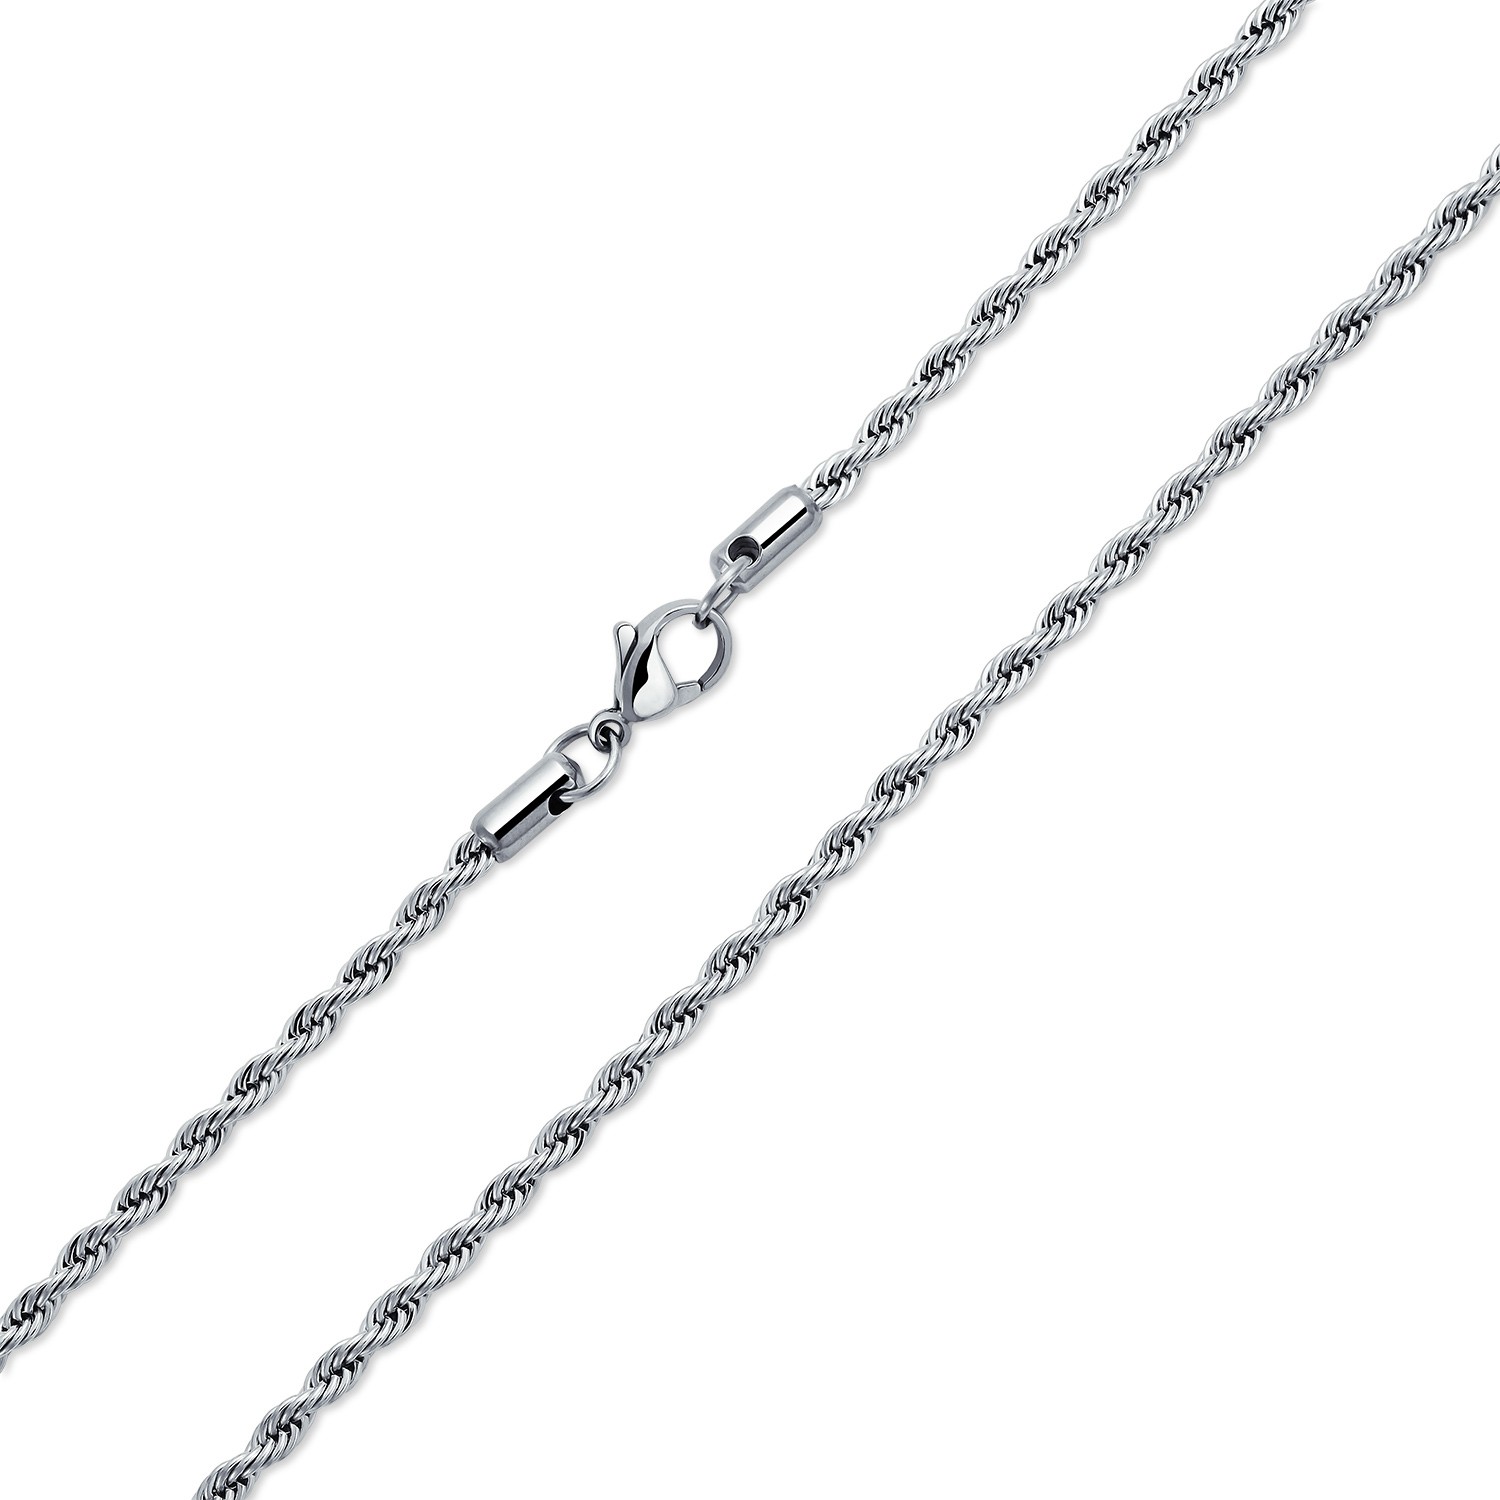 Mens Unisex Stainless Steel Rope Chain Necklace 2.5mm